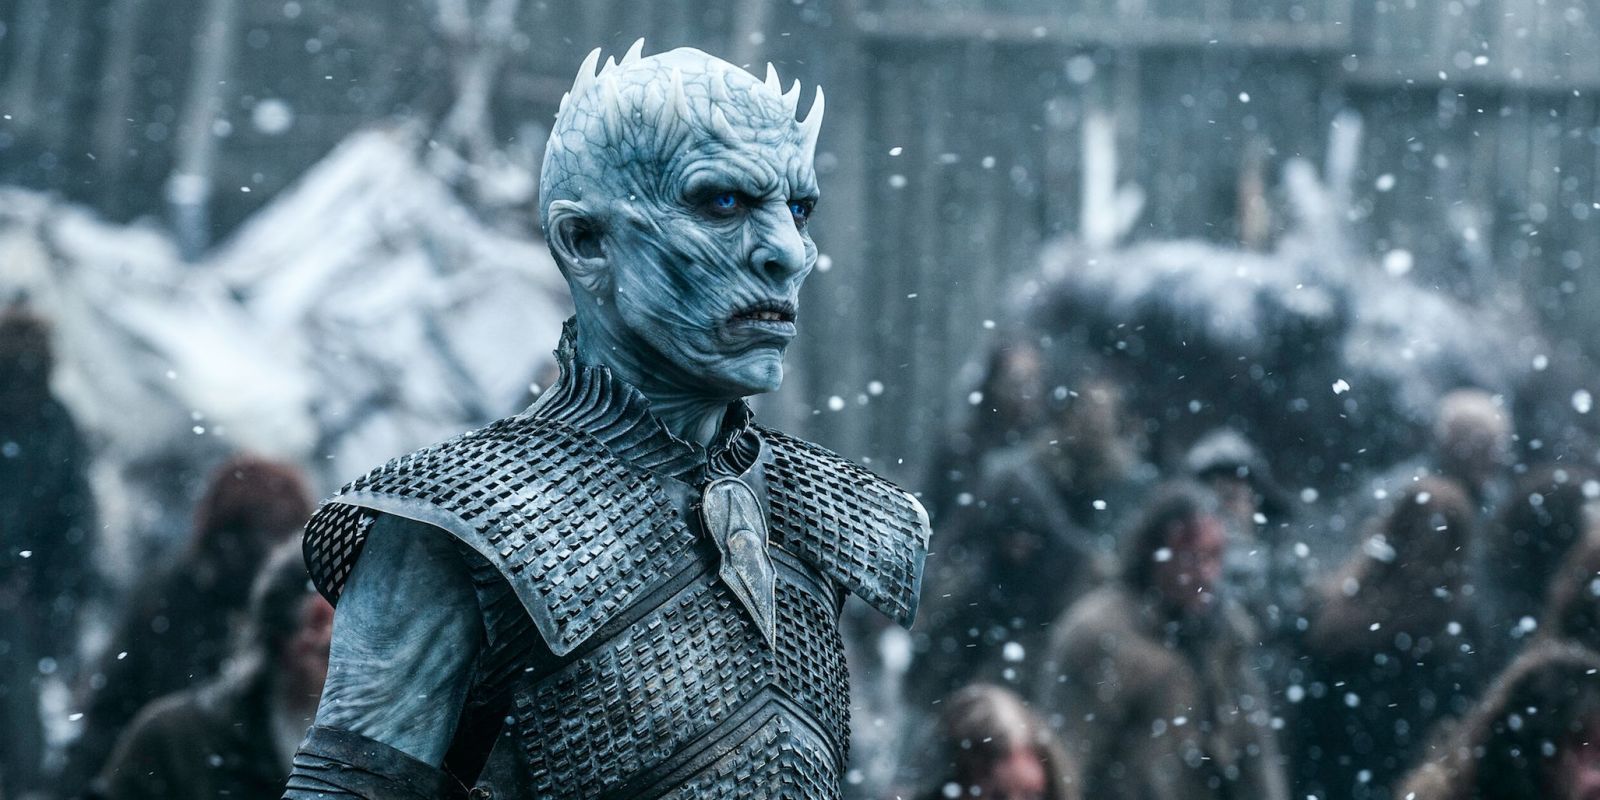 Game Of Thrones: Winter Is Finally Here